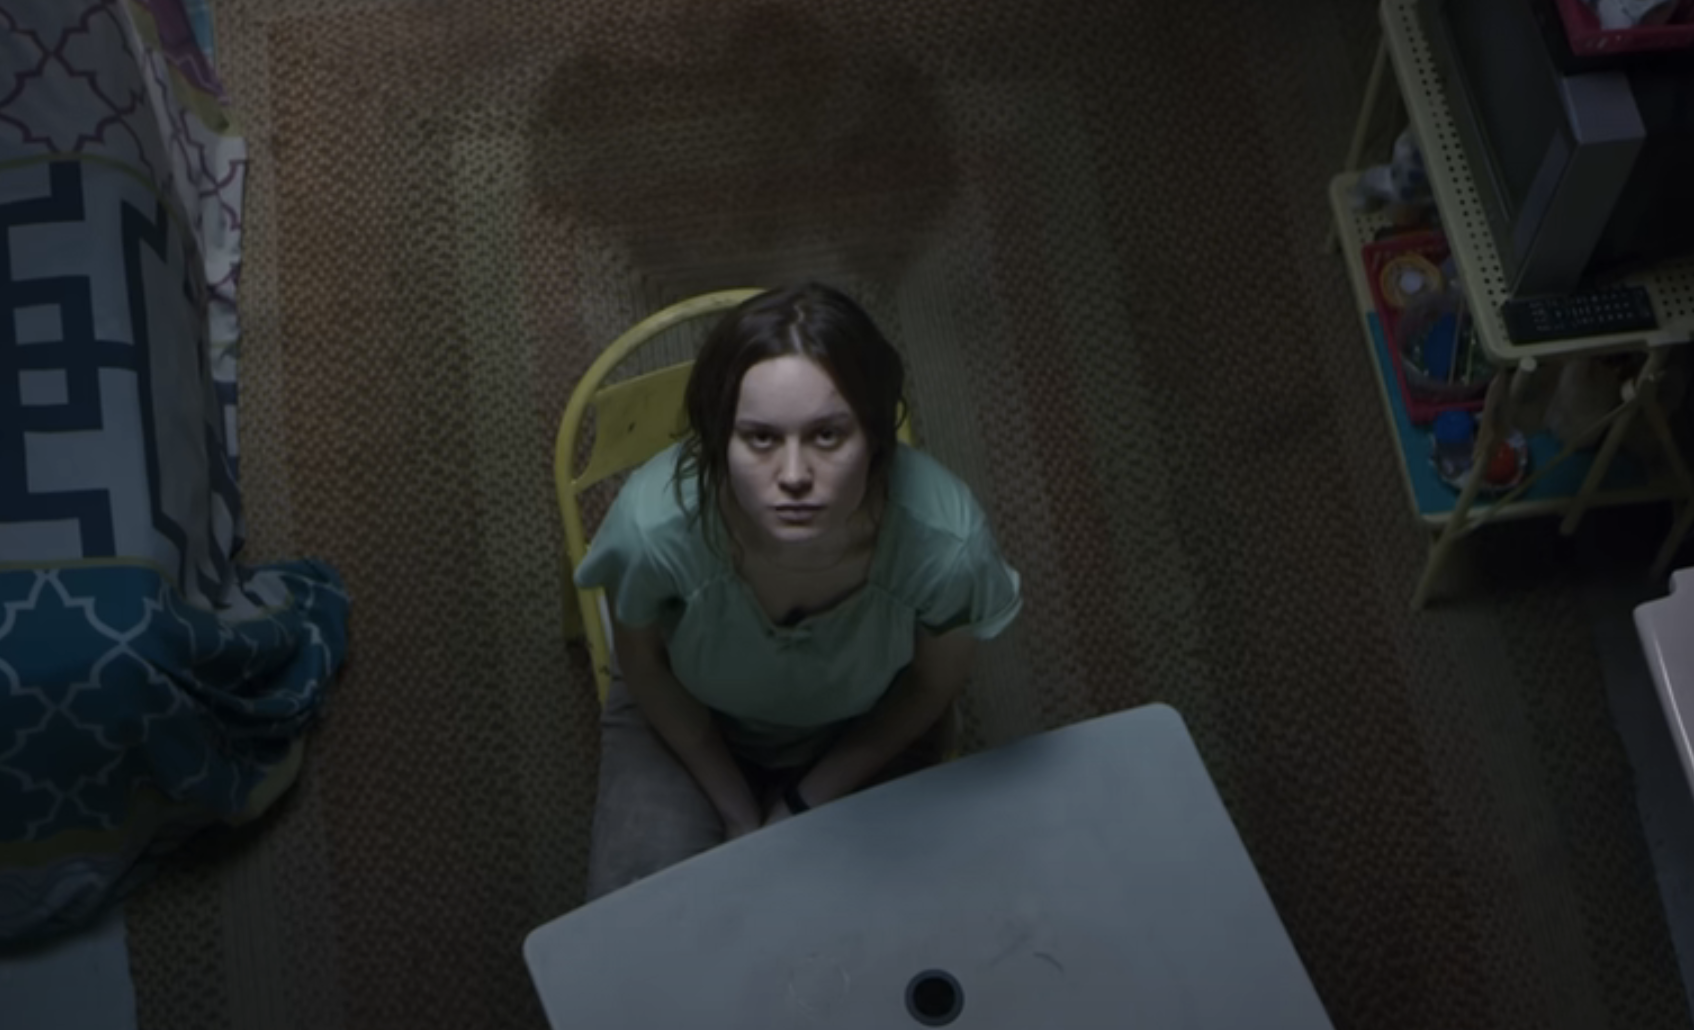 Brie Larson sitting on a chair in a sparse room, looking up towards the camera with a serious expression in a scene from Room